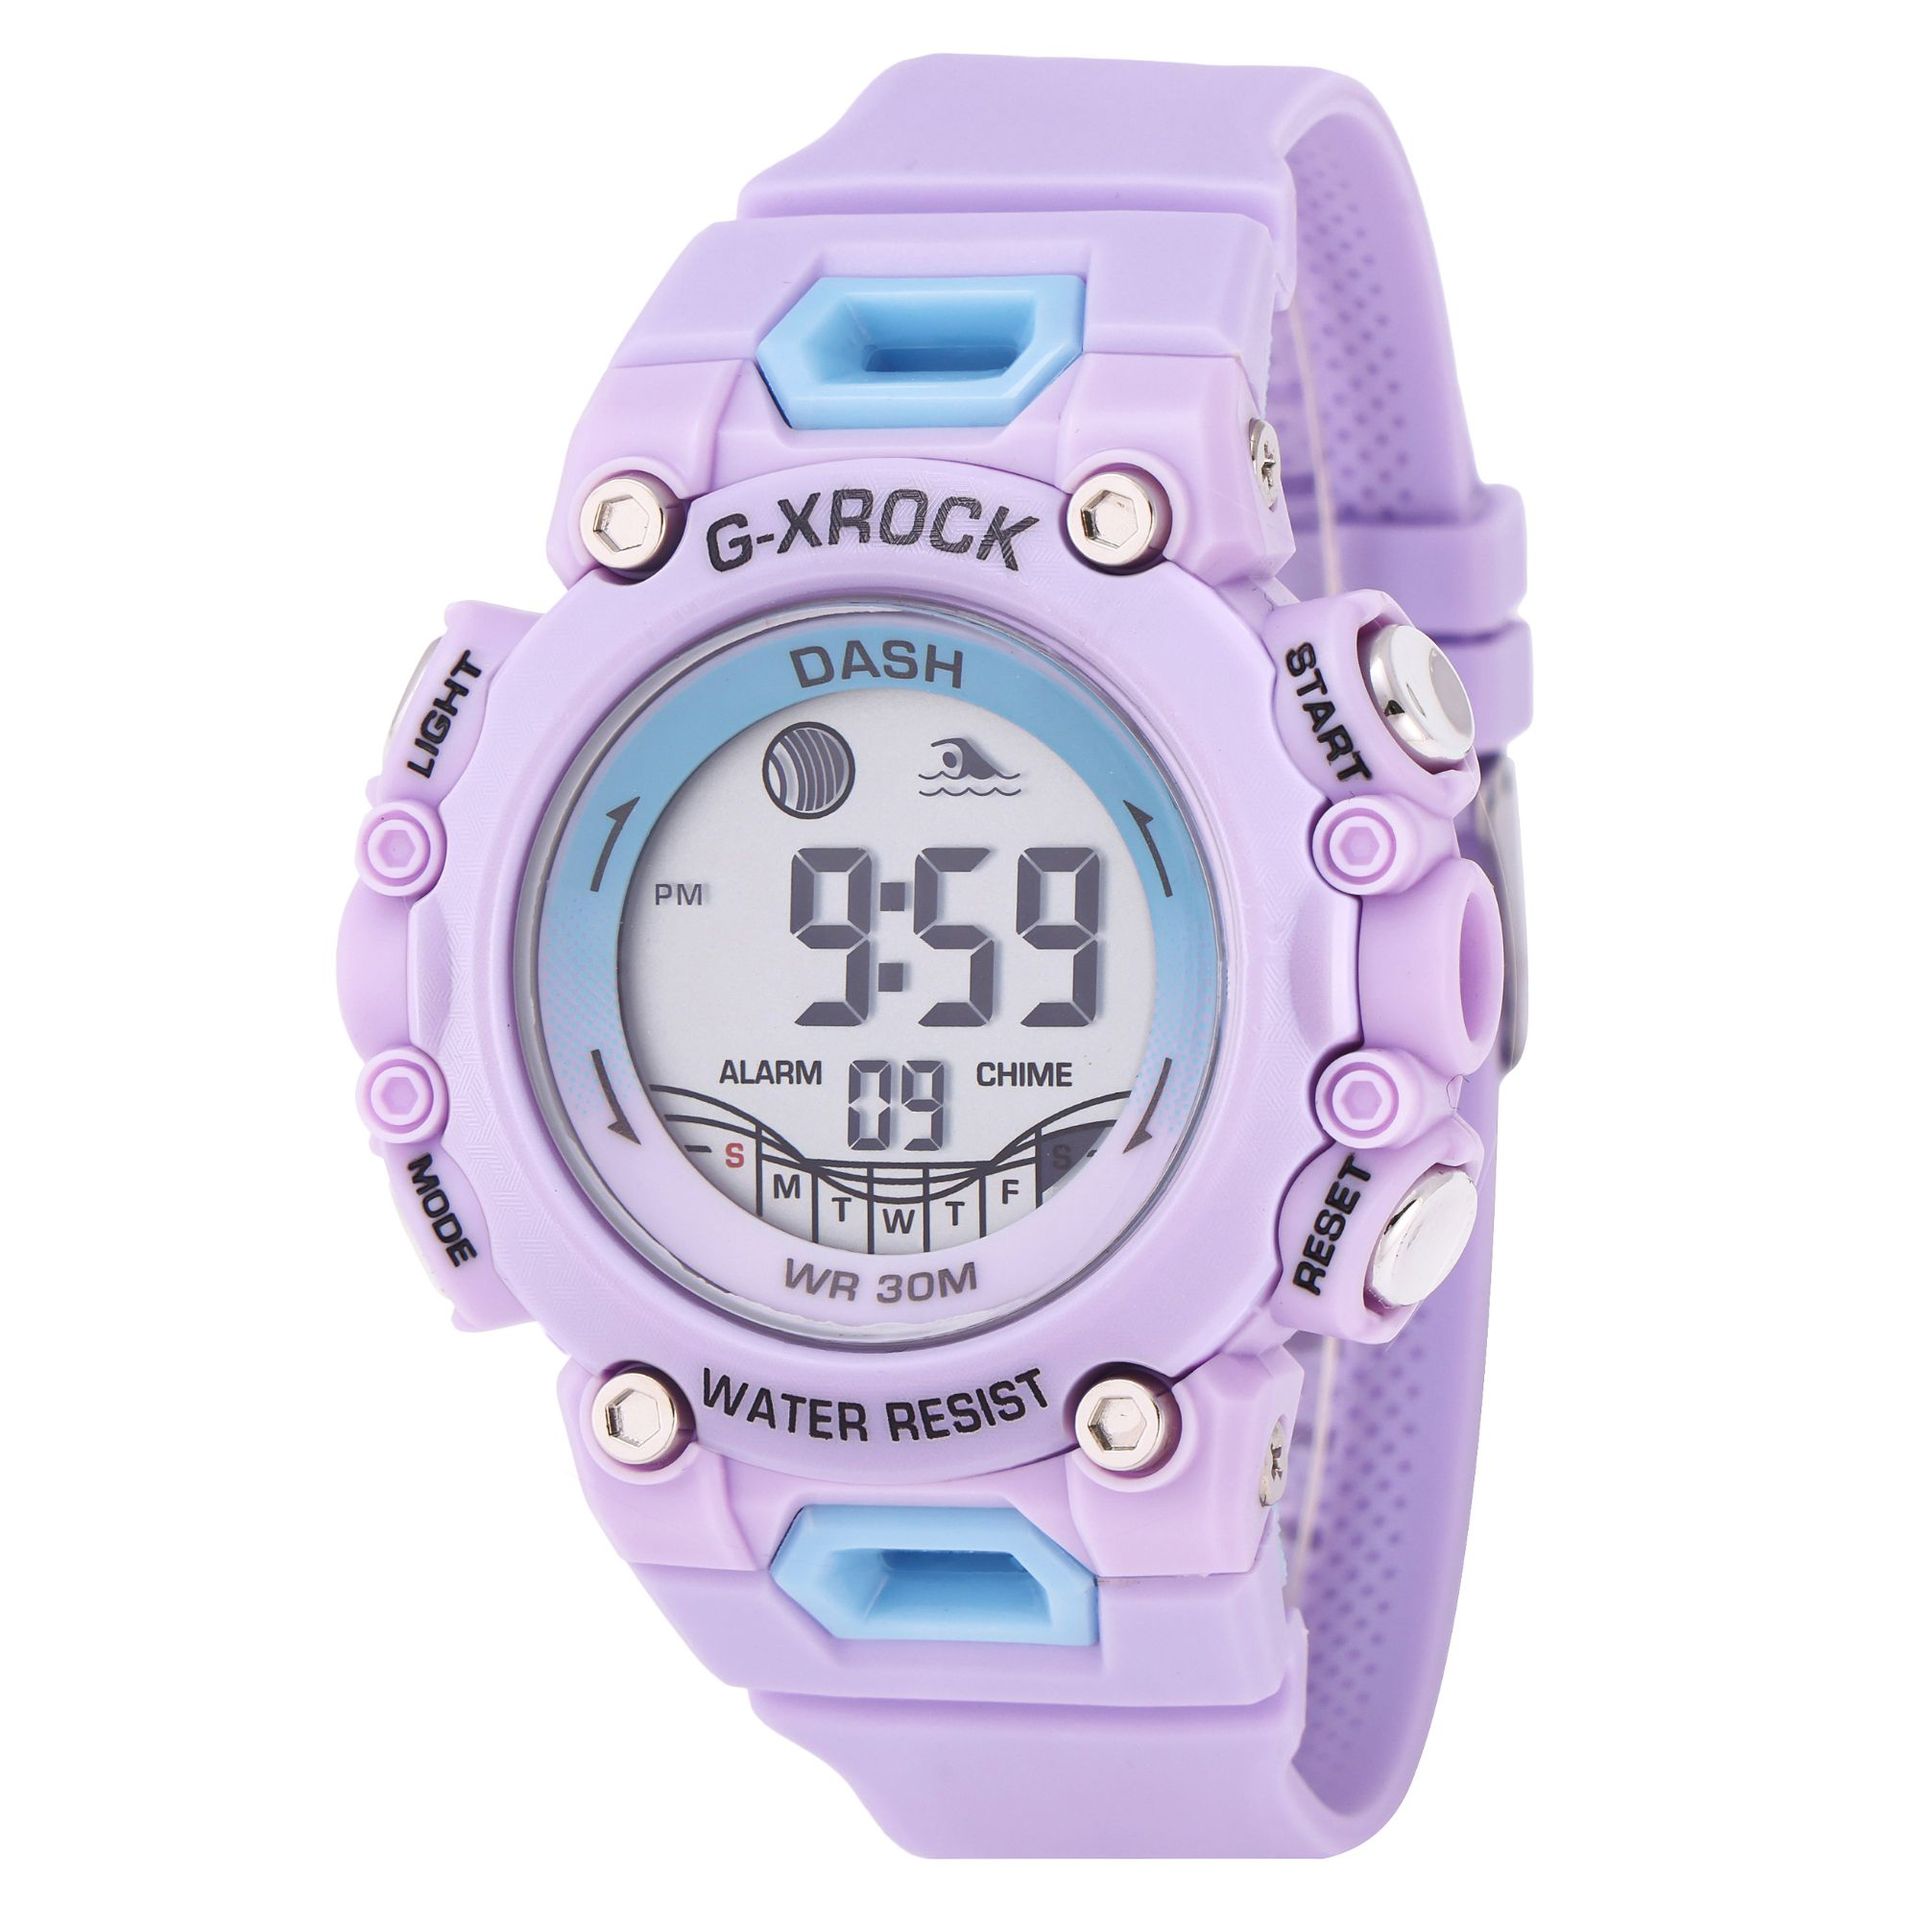 Dash 3330 Boxed Electronic Watch New Student Women's Sports Watch Wholesale Campus Peripheral Unicorn Waterproof